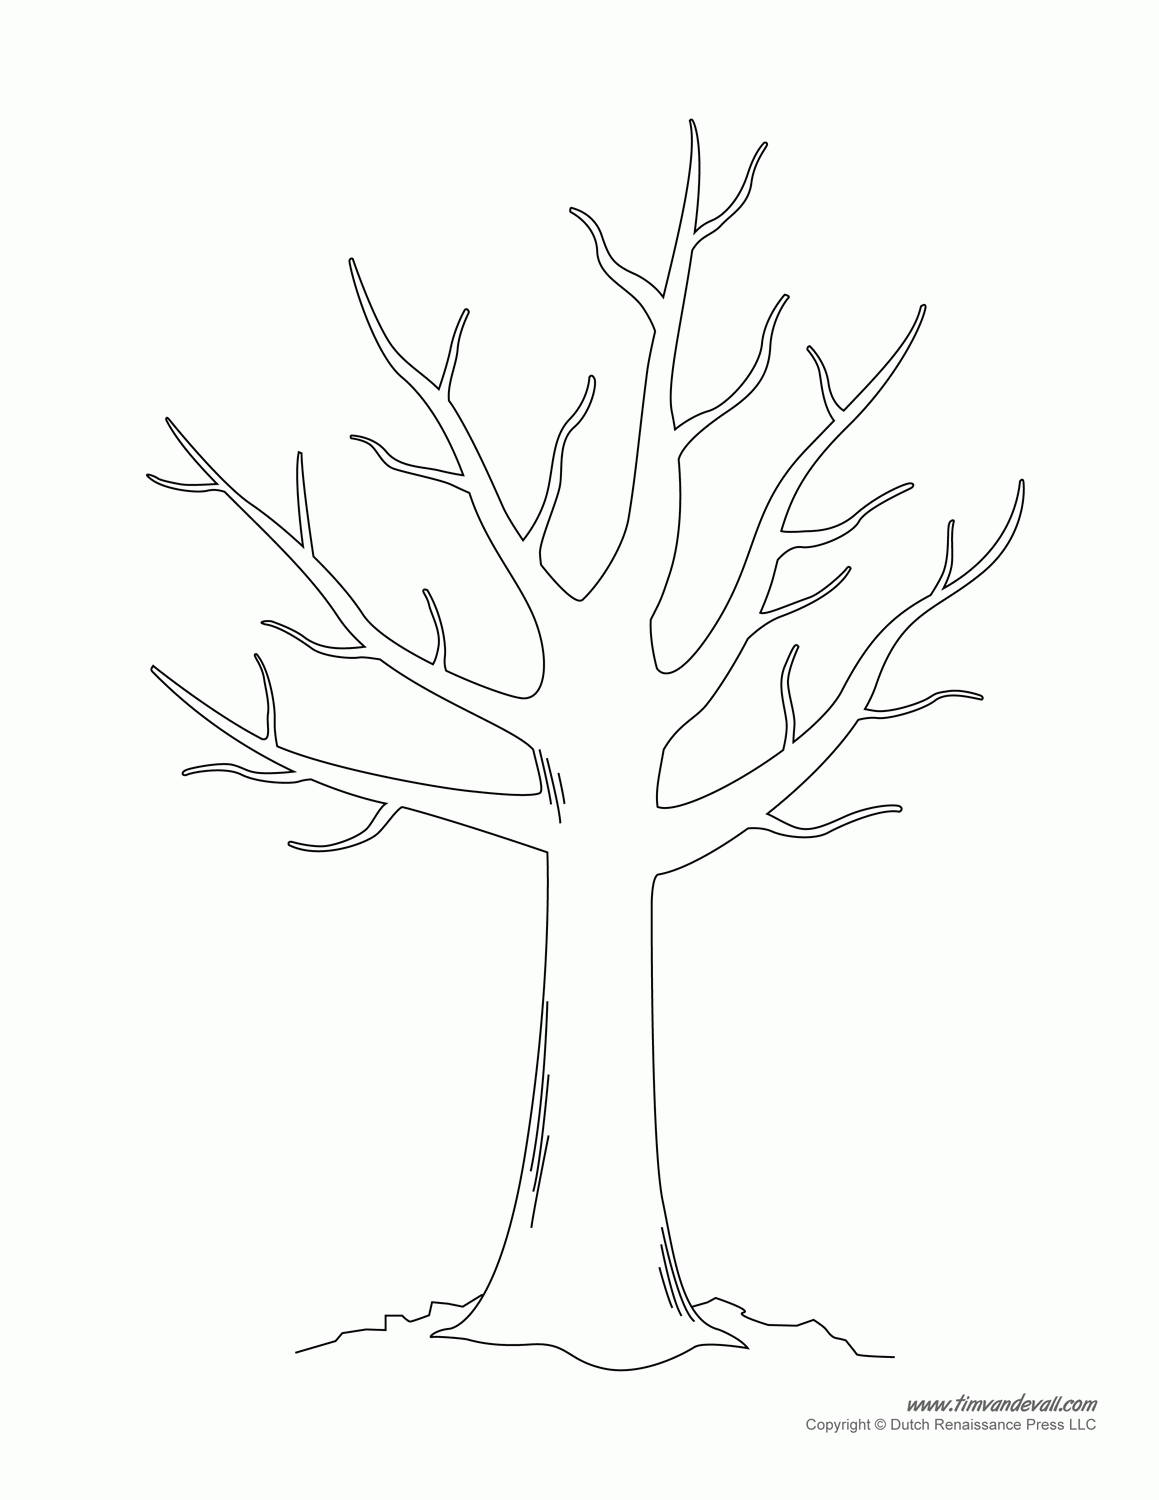 Fall Tree Template No Leaves